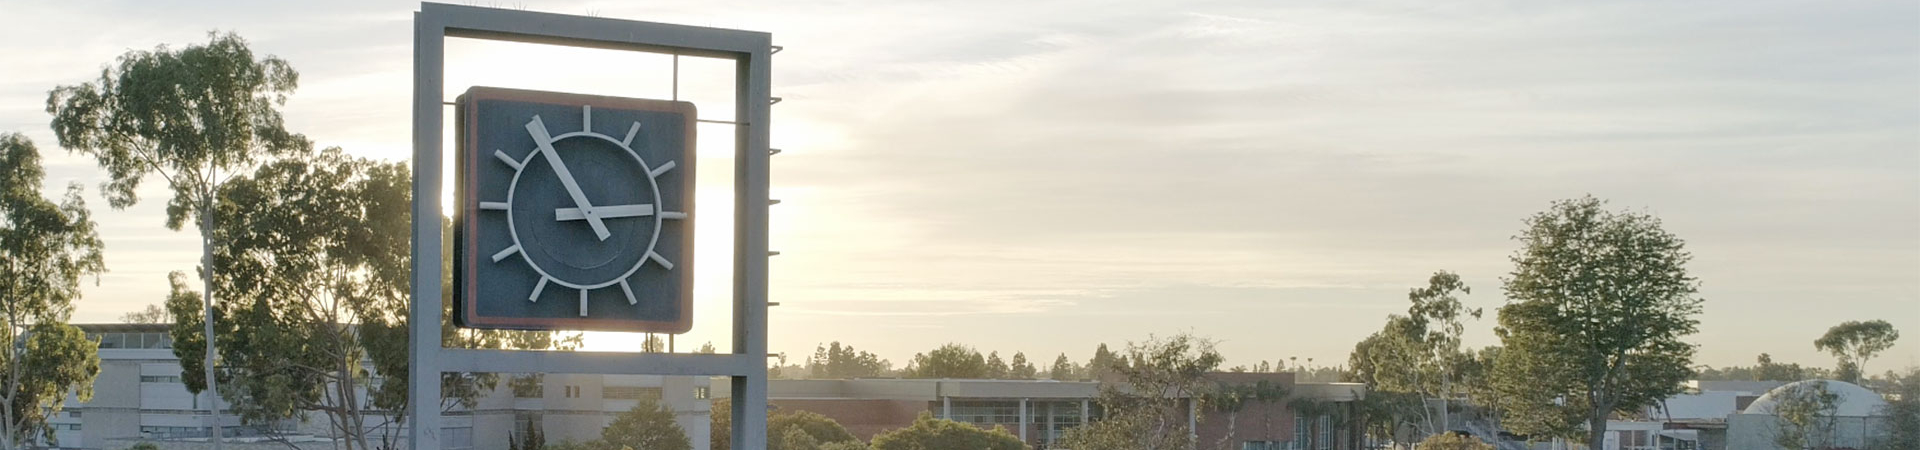 OCC Clock Tower with campus and sunset in background